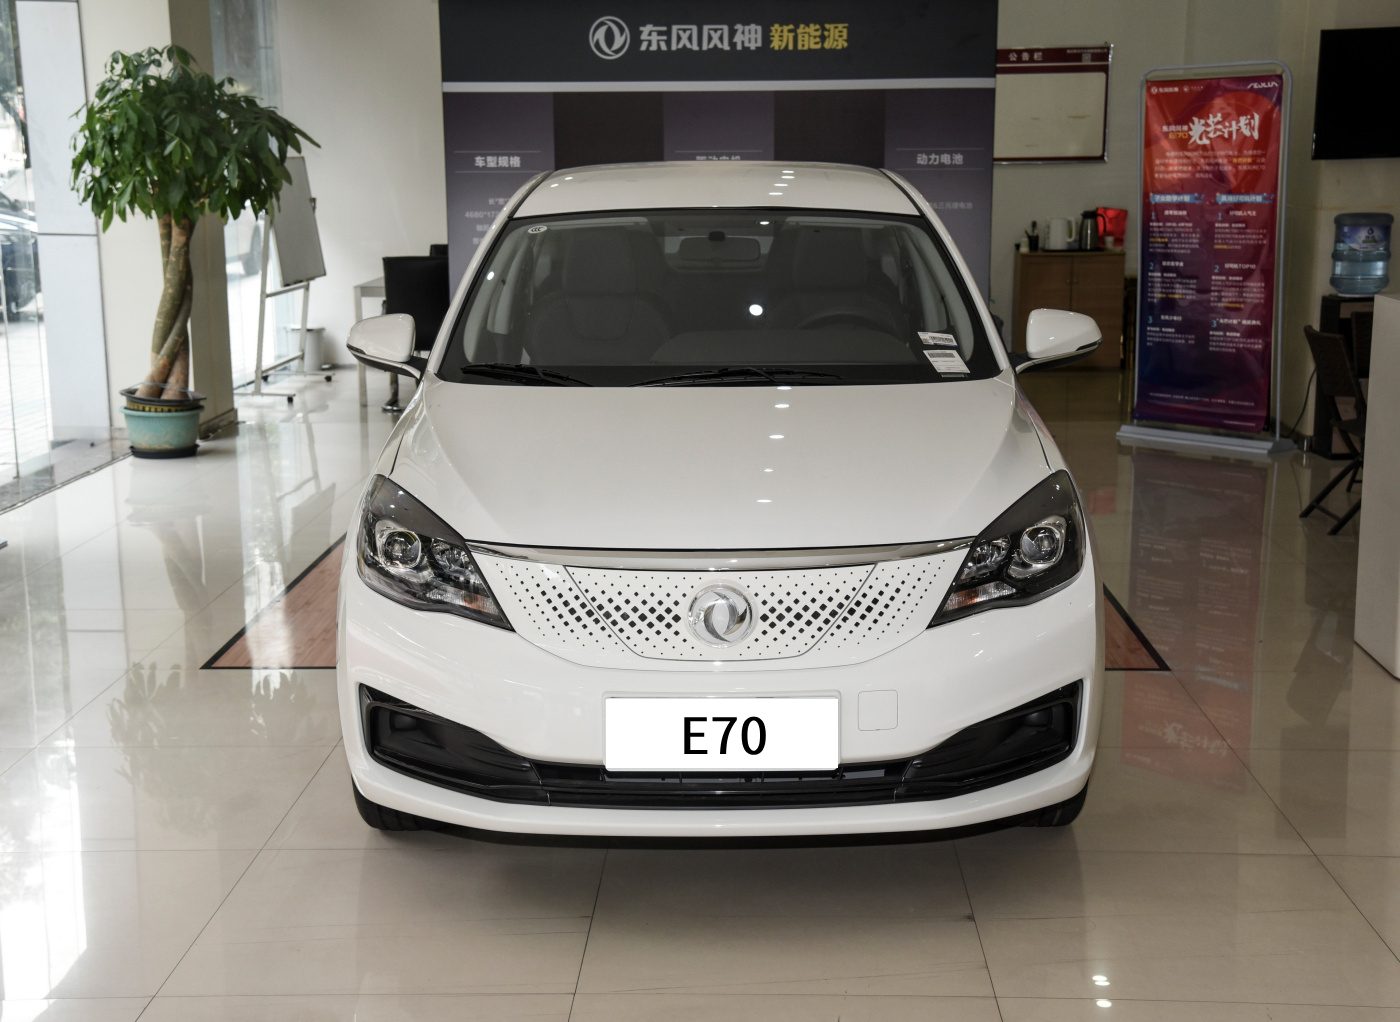 Used Car Dongfeng Aeolus E70 New Energy Pure Electric Vehicle EV Car in Stock - E70 - 1